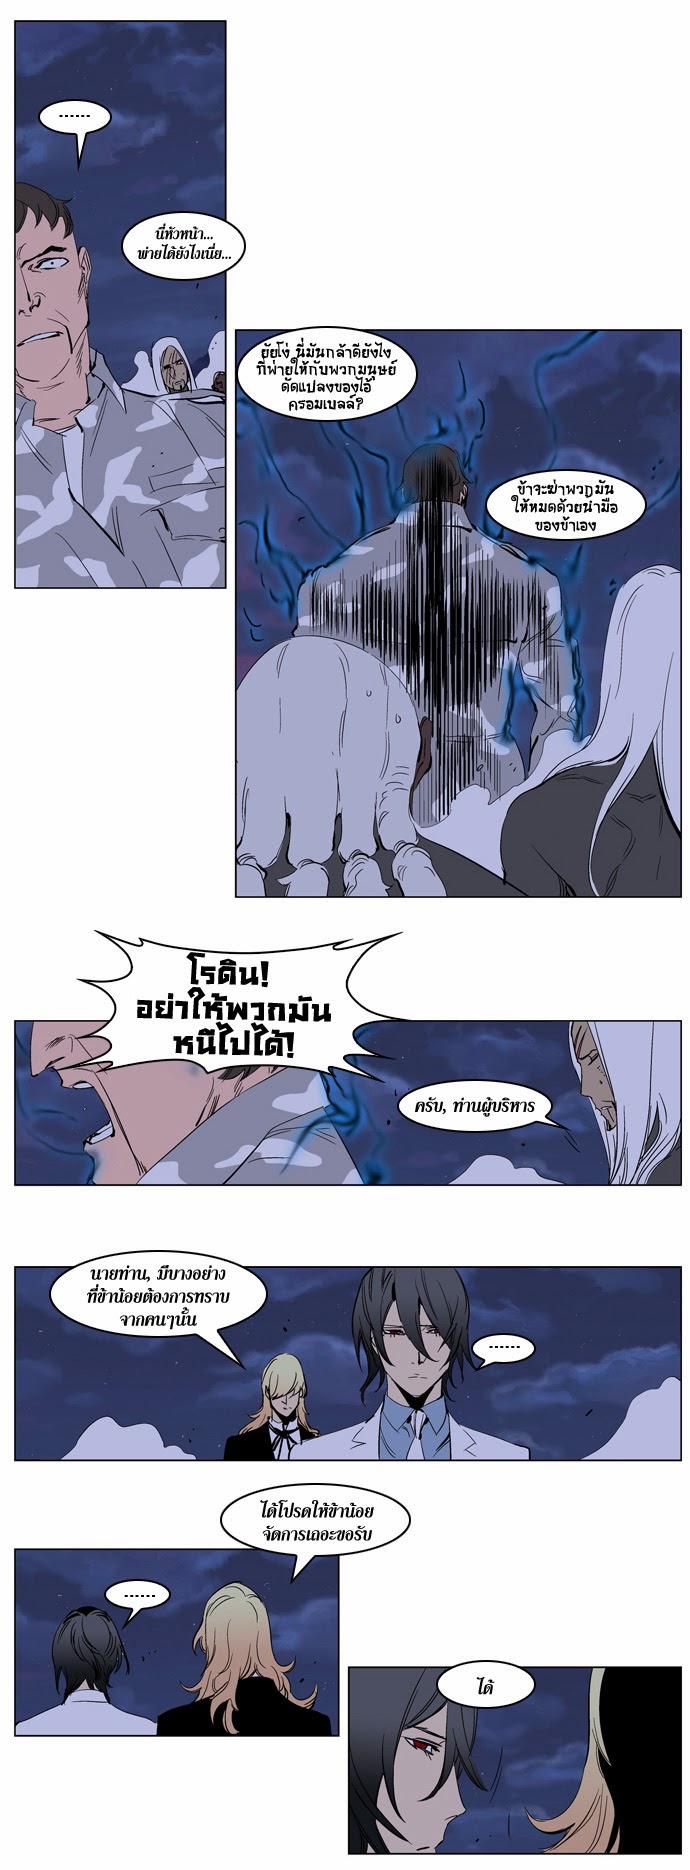 Noblesse 231 015